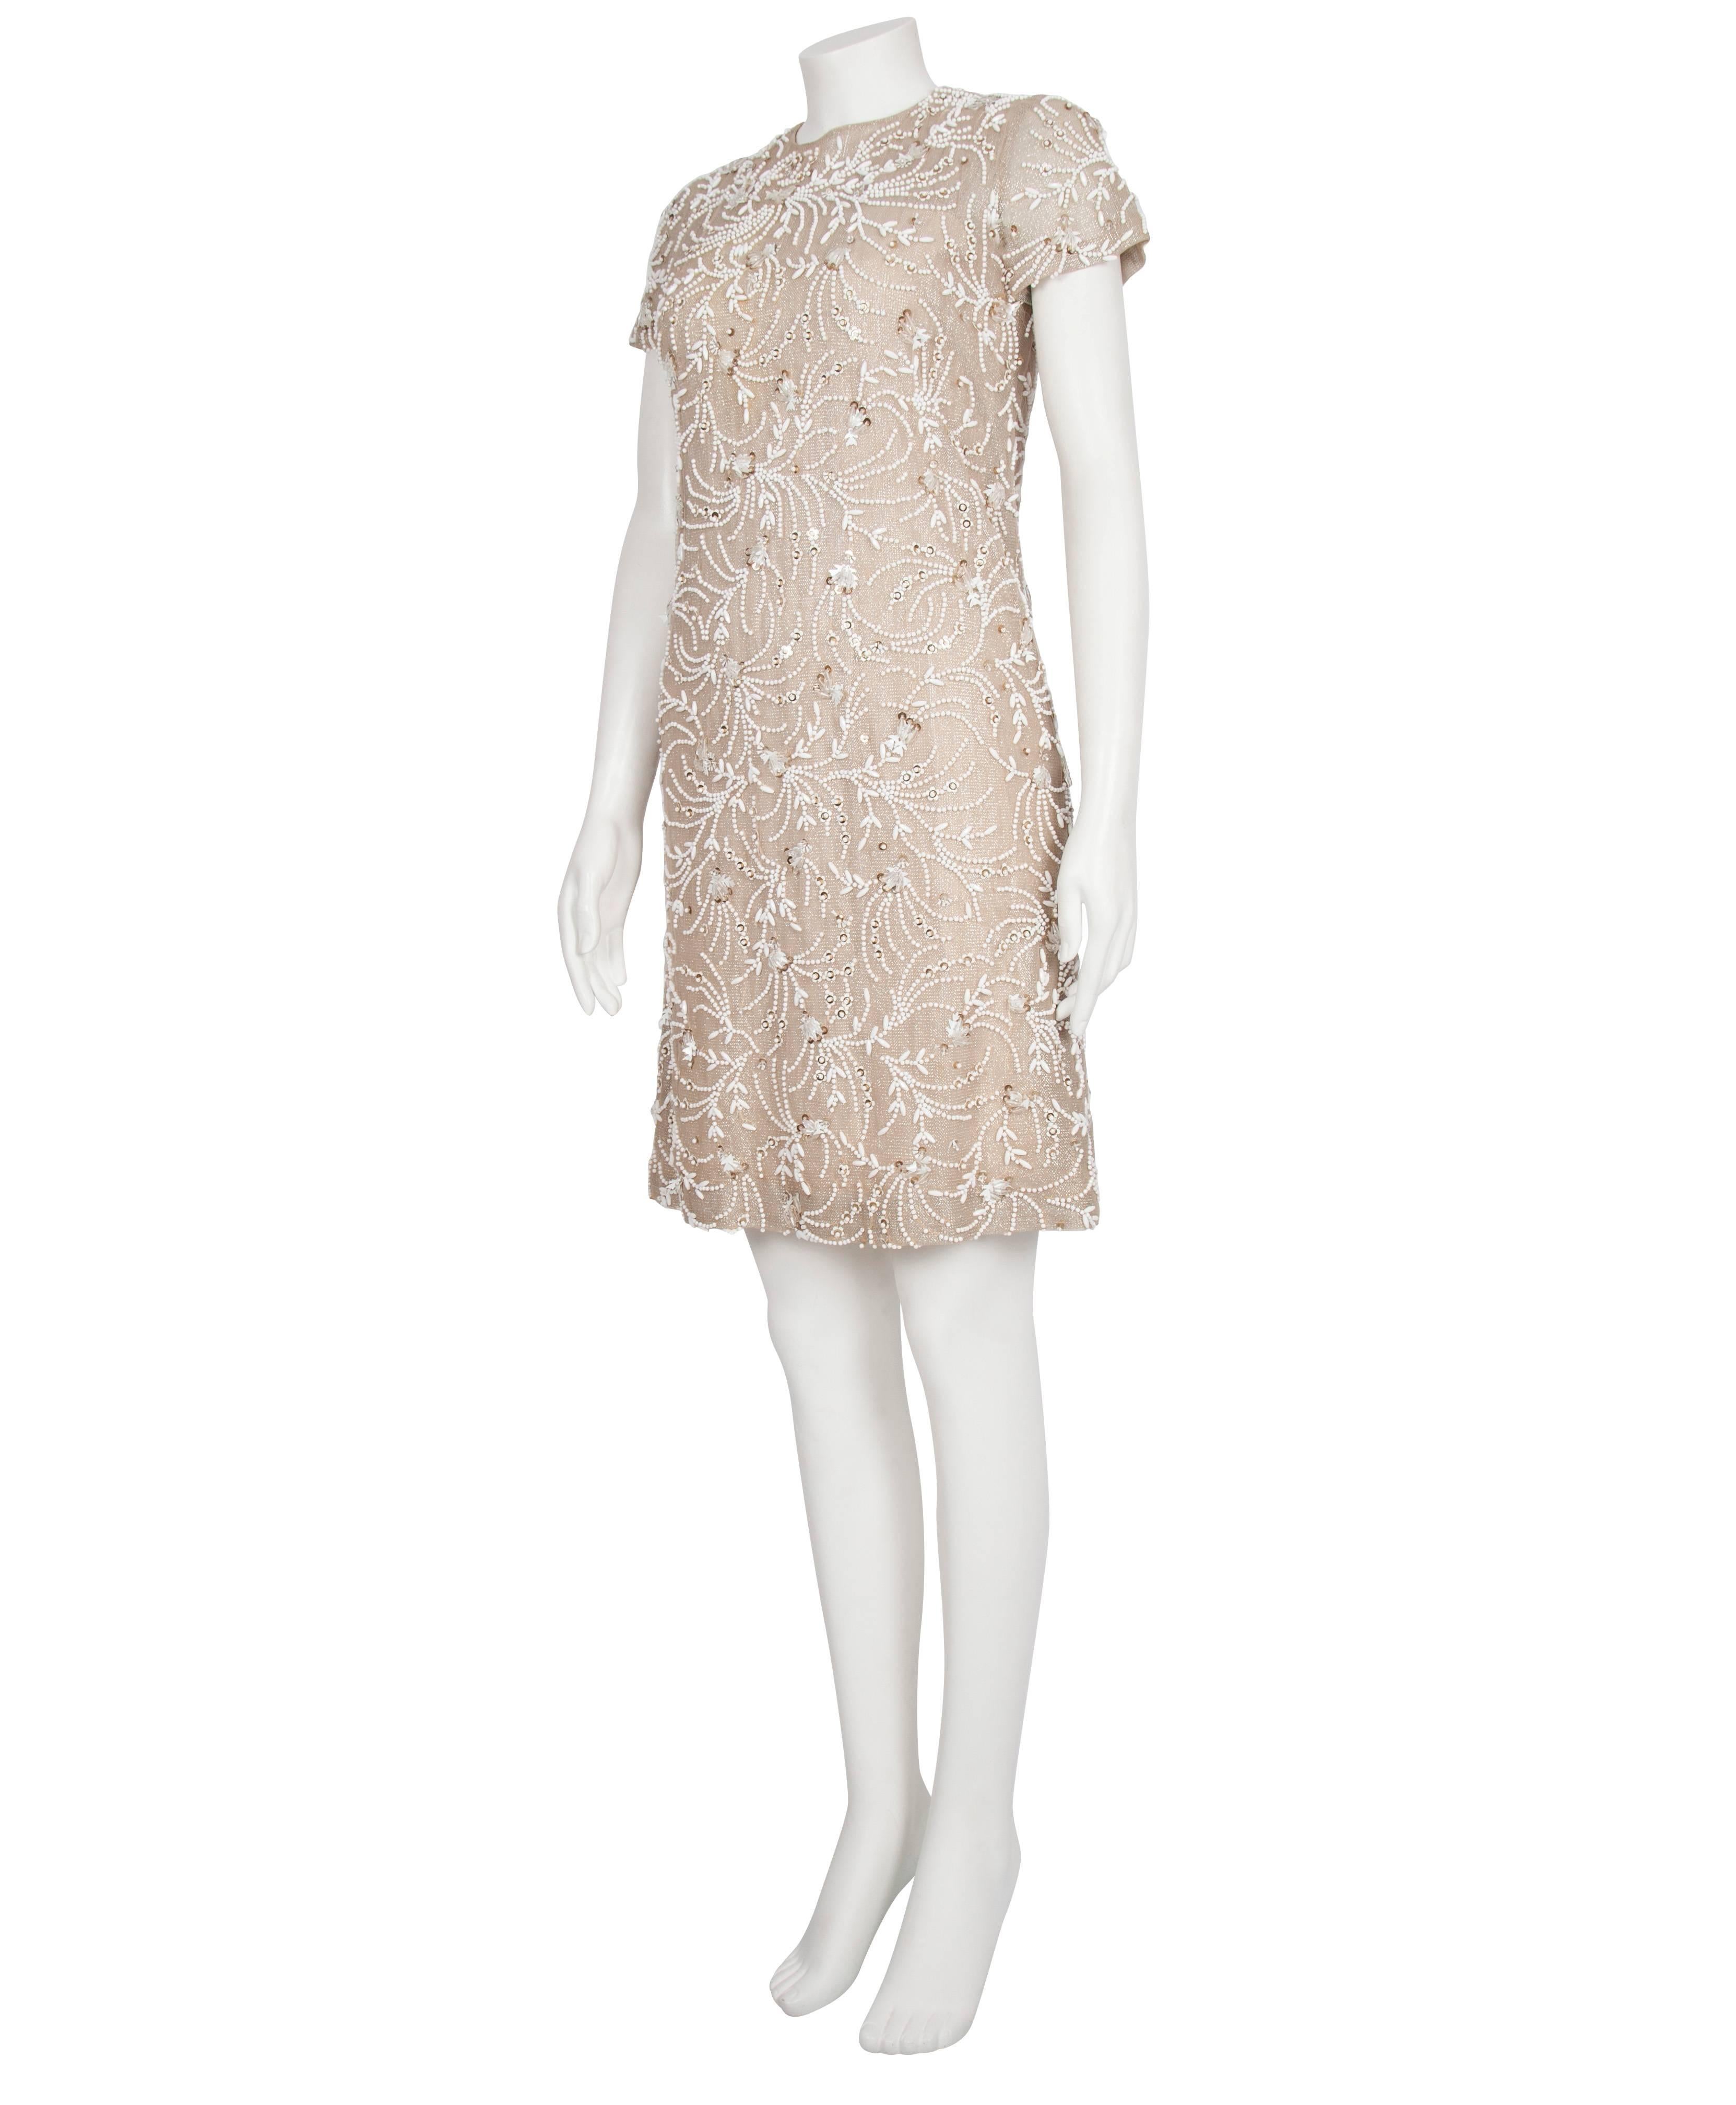 1960s Malcolm Starr Metallic and Ivory Beaded Shift Dress In Excellent Condition For Sale In London, GB